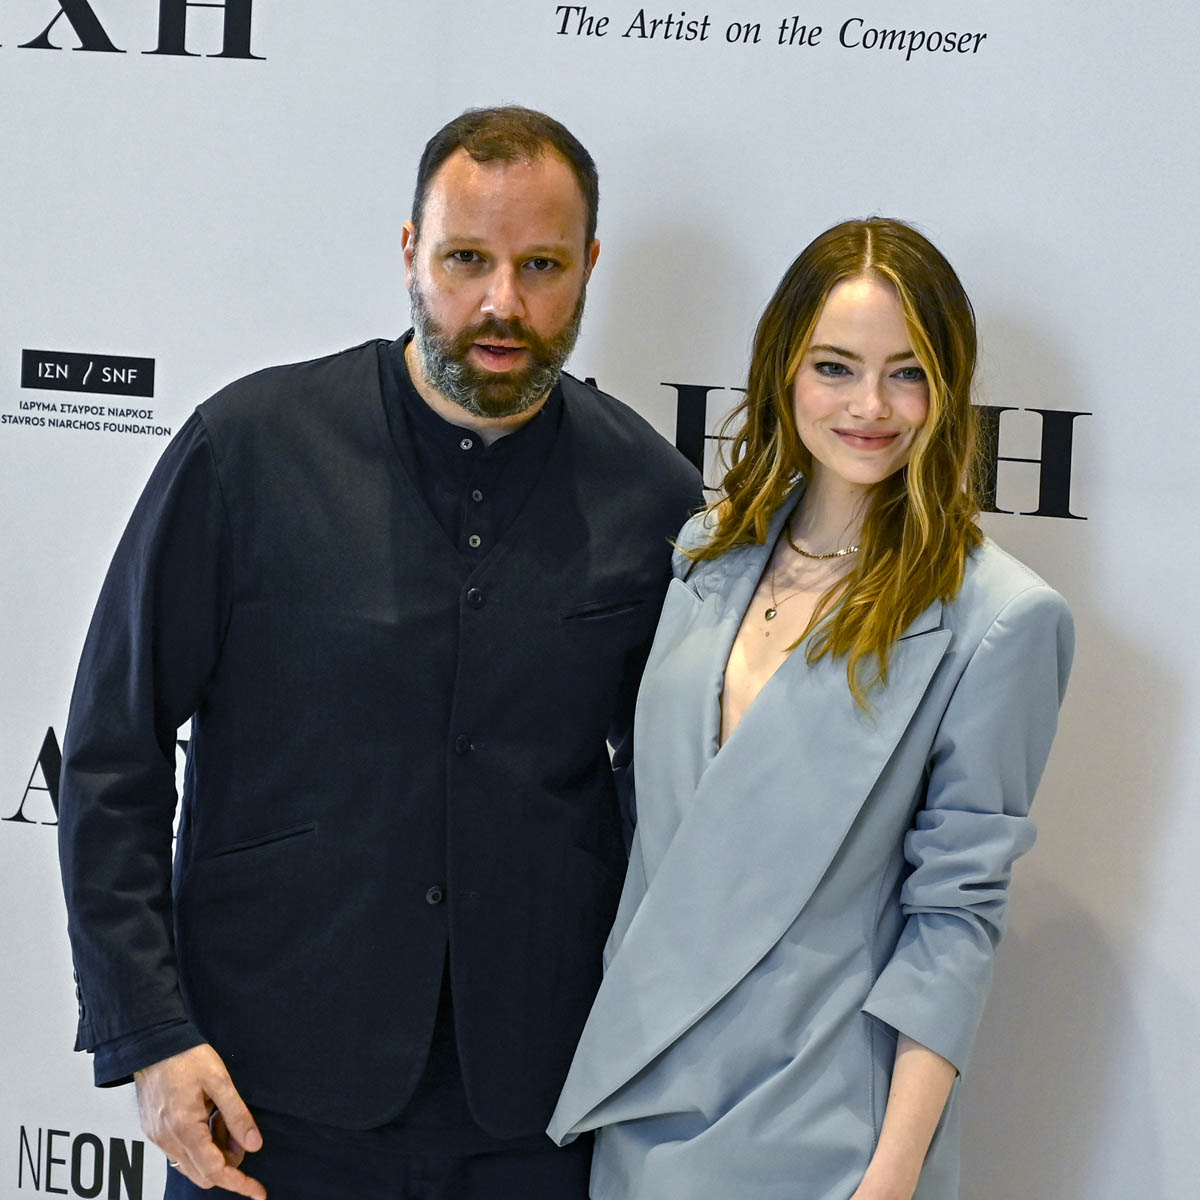 Emma Stone and Yorgos Lanthimos find a loophole to promote struck work,  their film Poor Things, while at NYFF to promote short film, Bleat